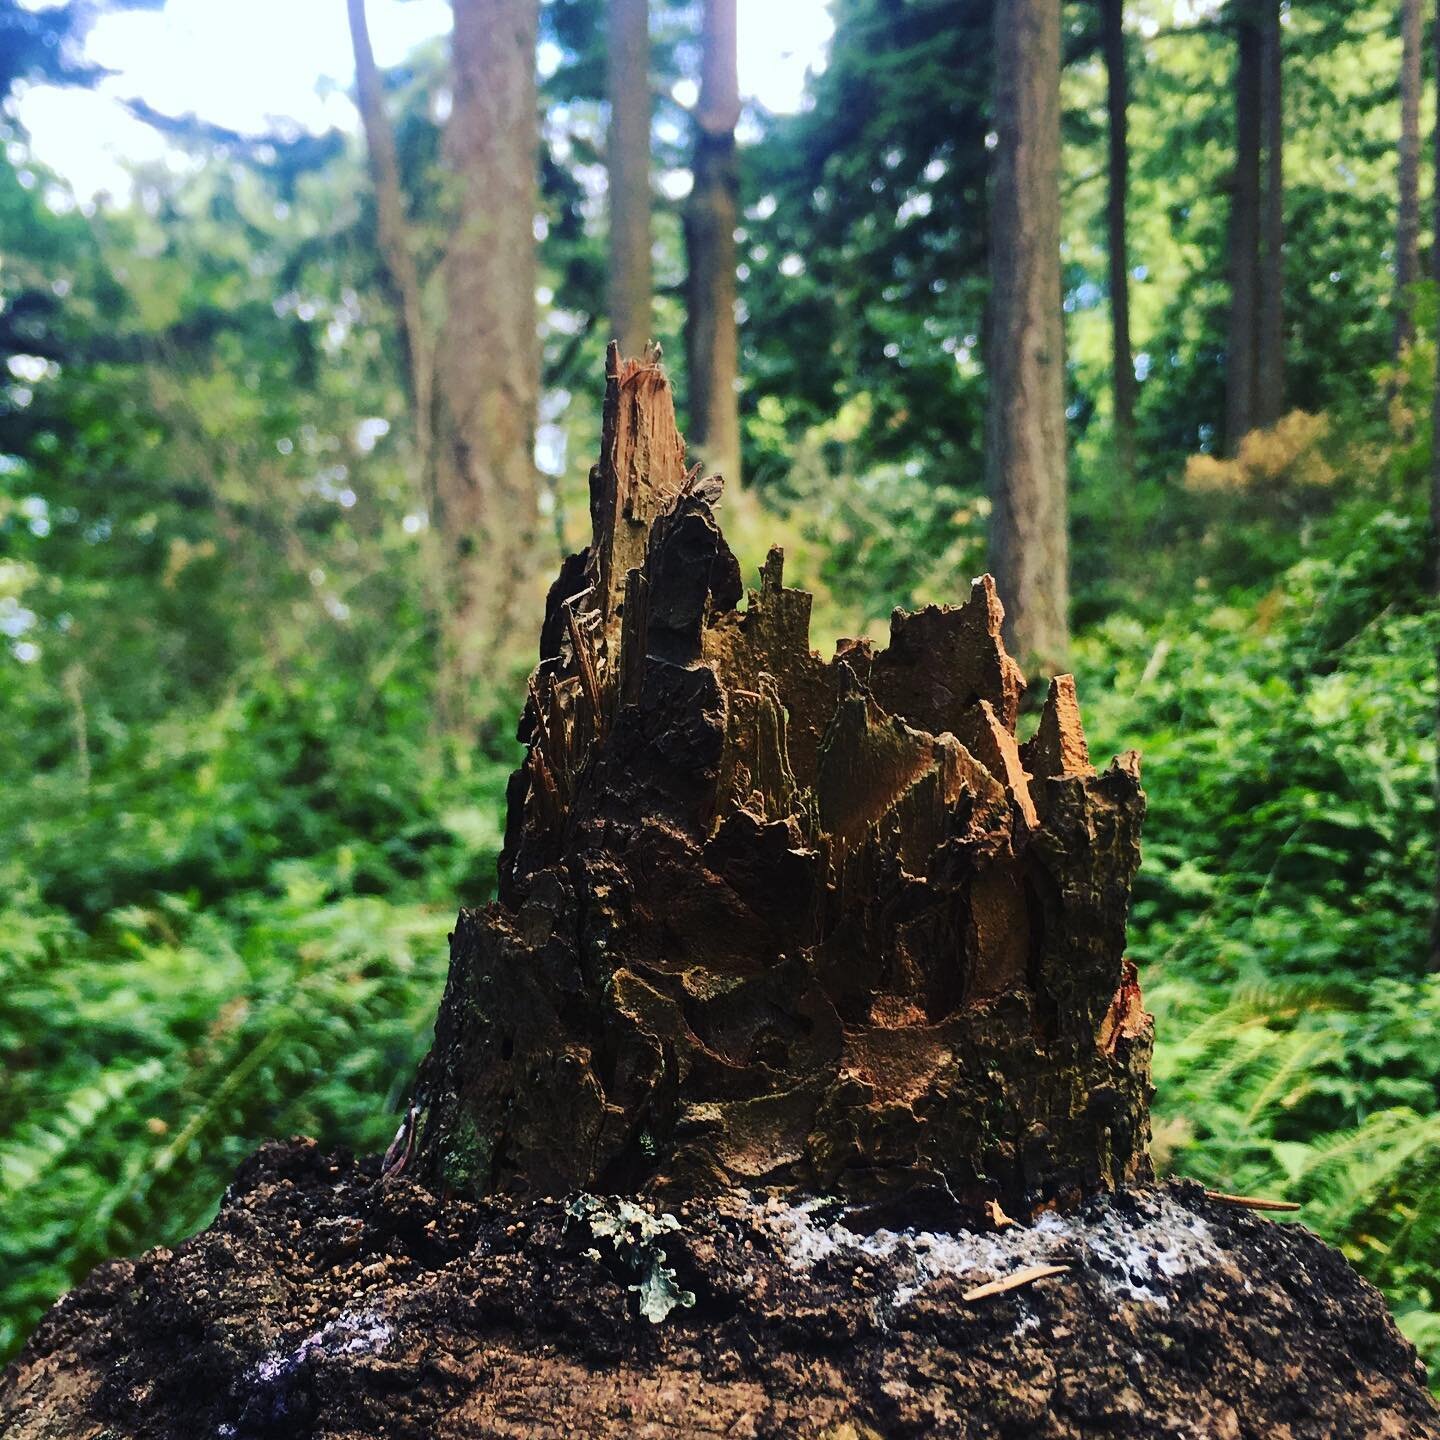 Lost crown? Ancient mountain village? Other thoughts @arborschool  kiddos? 

#nature #naturestudy #storytelling #schoollibraries #outdoored #forest #natureart #naturestories #childrensstories #tellingstories #curiosity #schoollibrarians #childrenslib